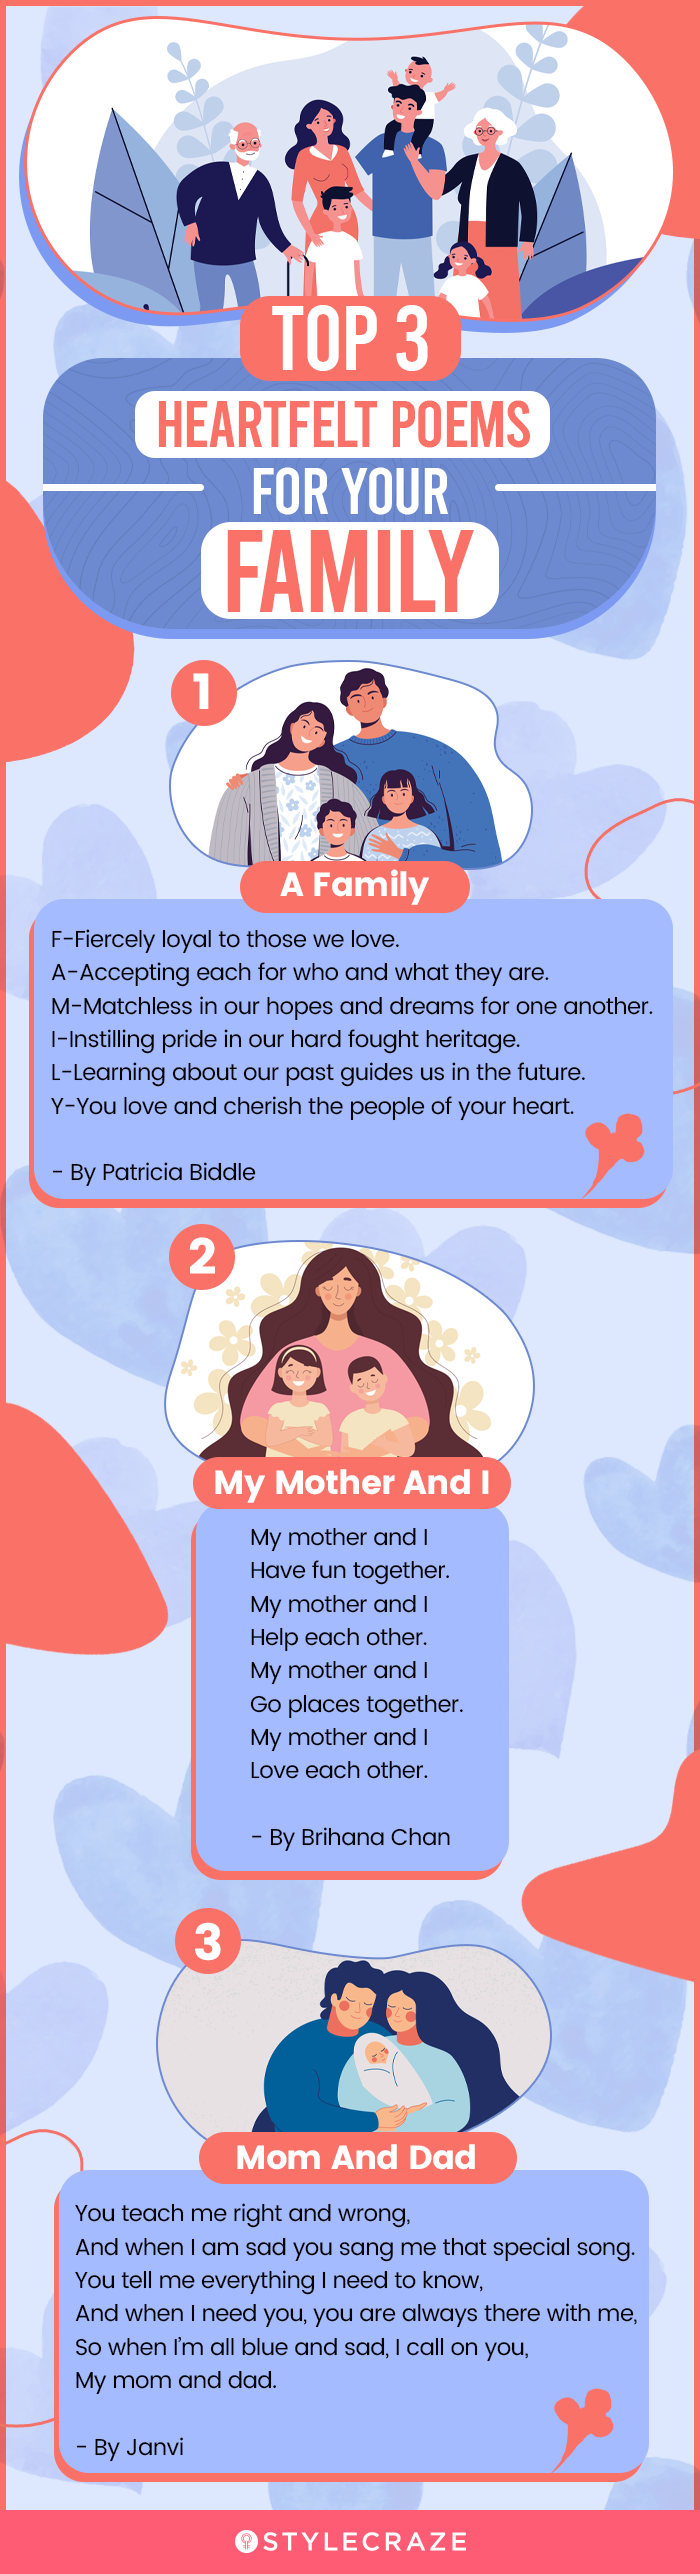 top 3 pick for heartfelt poems for your family (infographic)